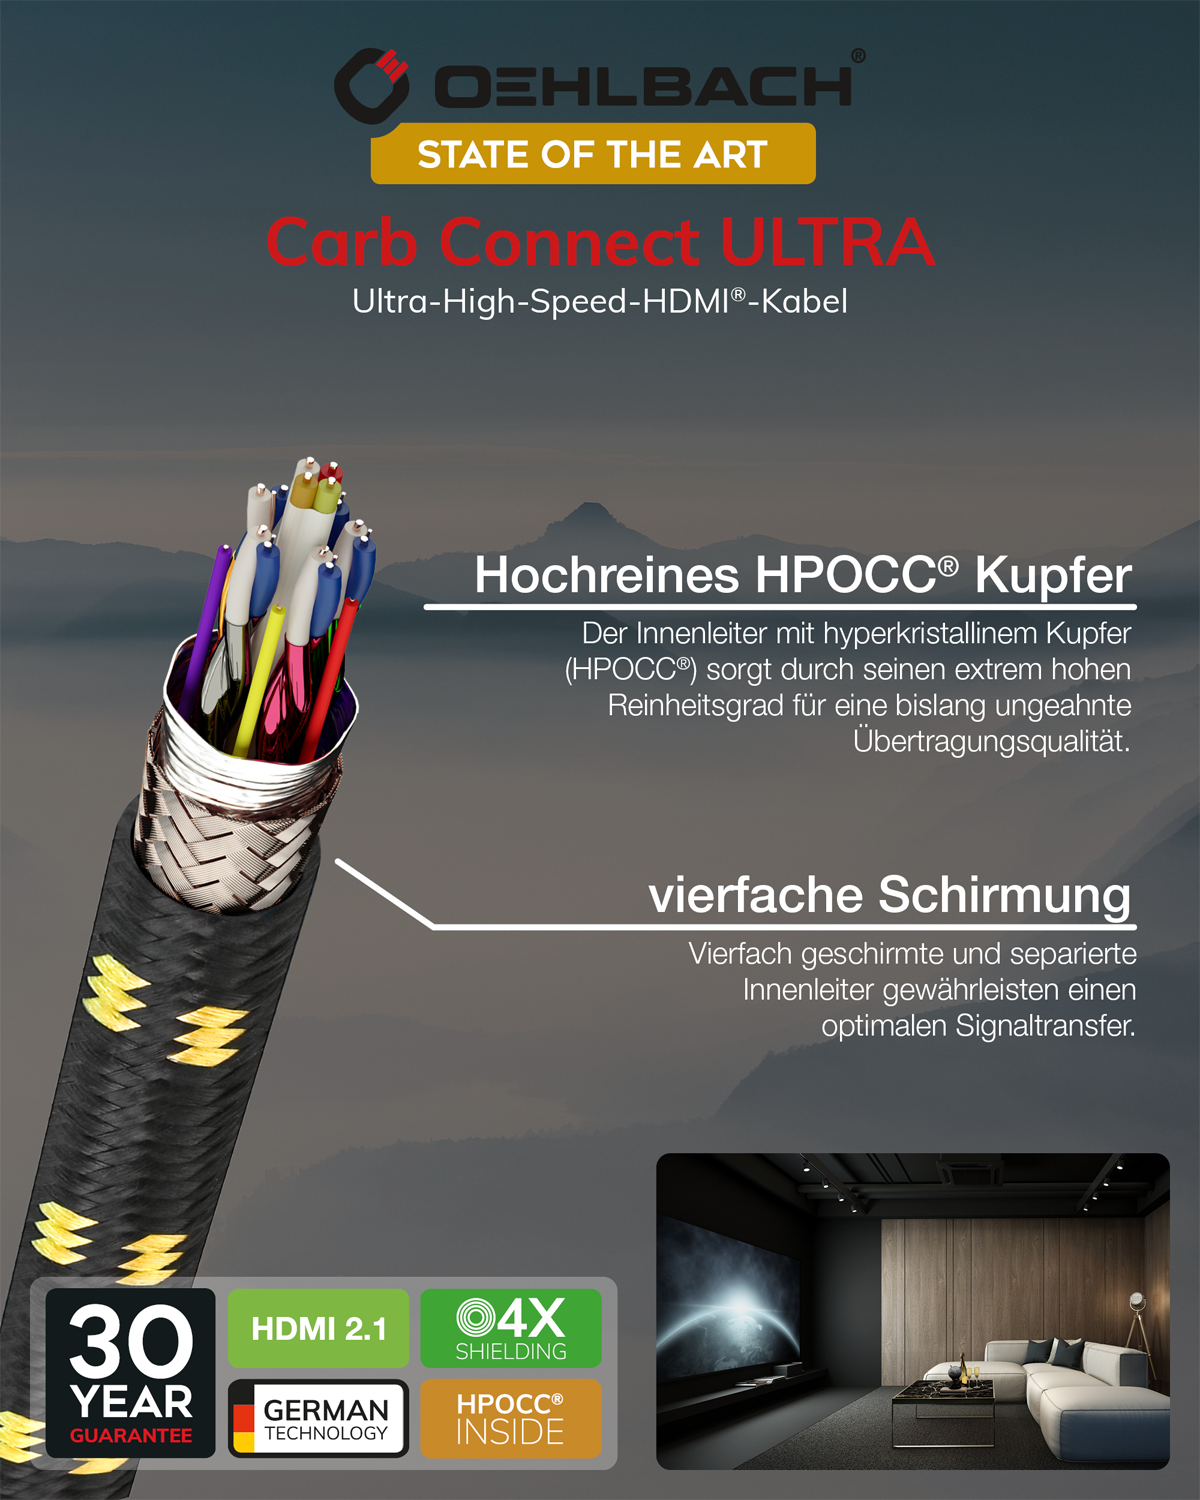 OEHLBACH 8K Ultra High Kabel Connect End Carb HDMI